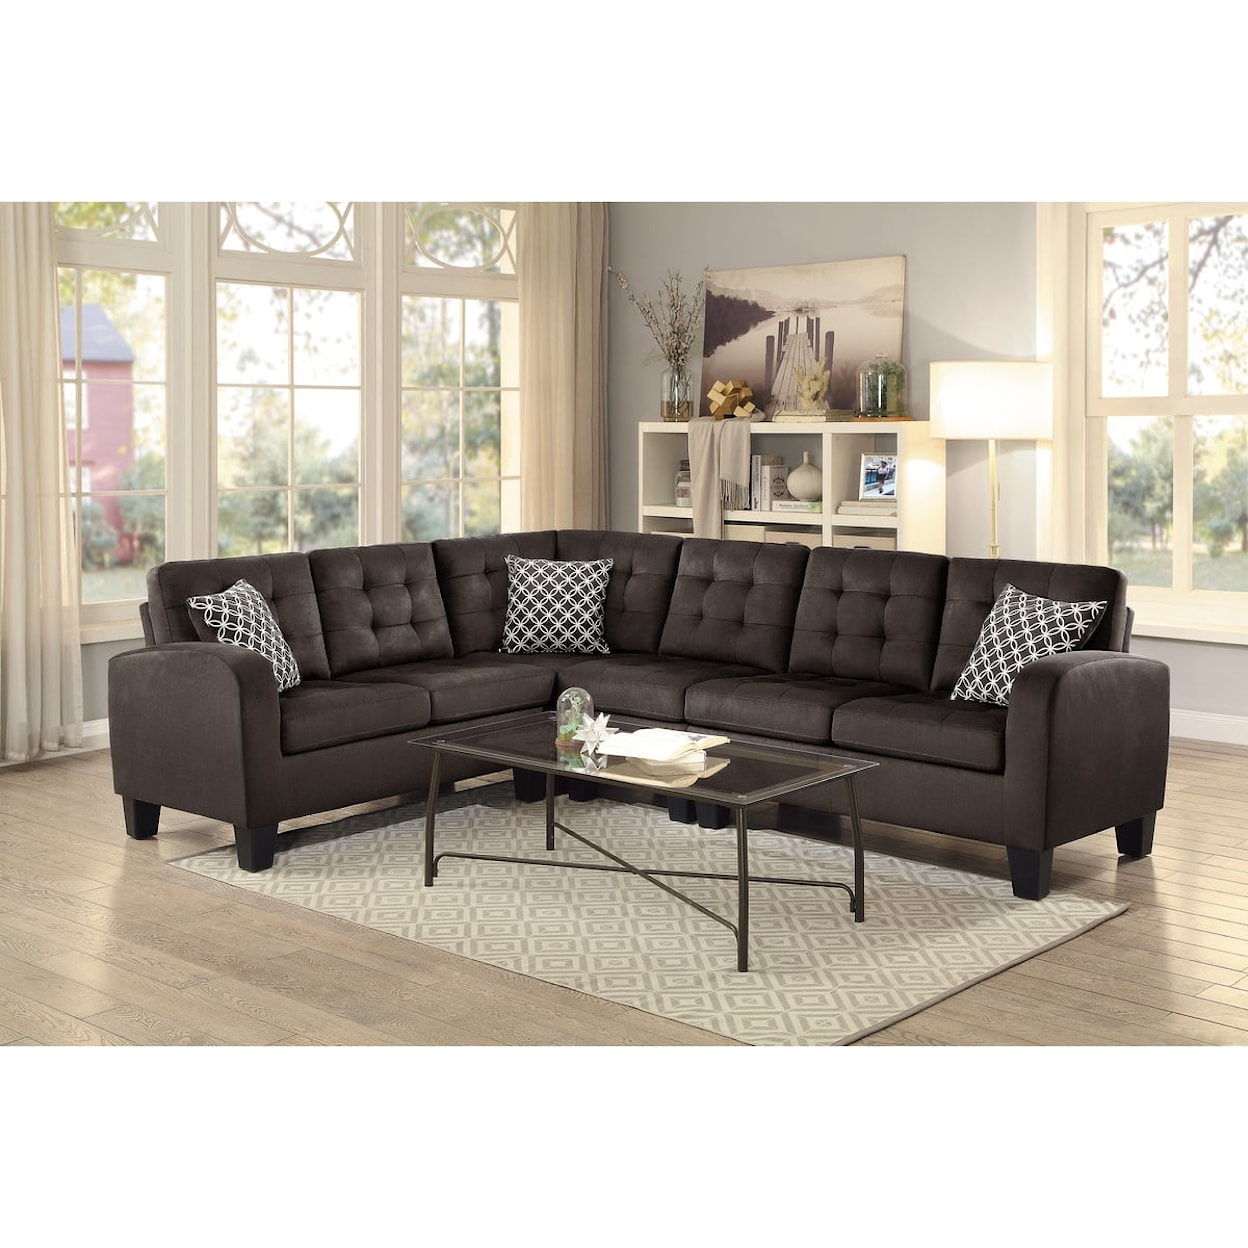 Homelegance Sinclair 2-Piece Reversible Sectional